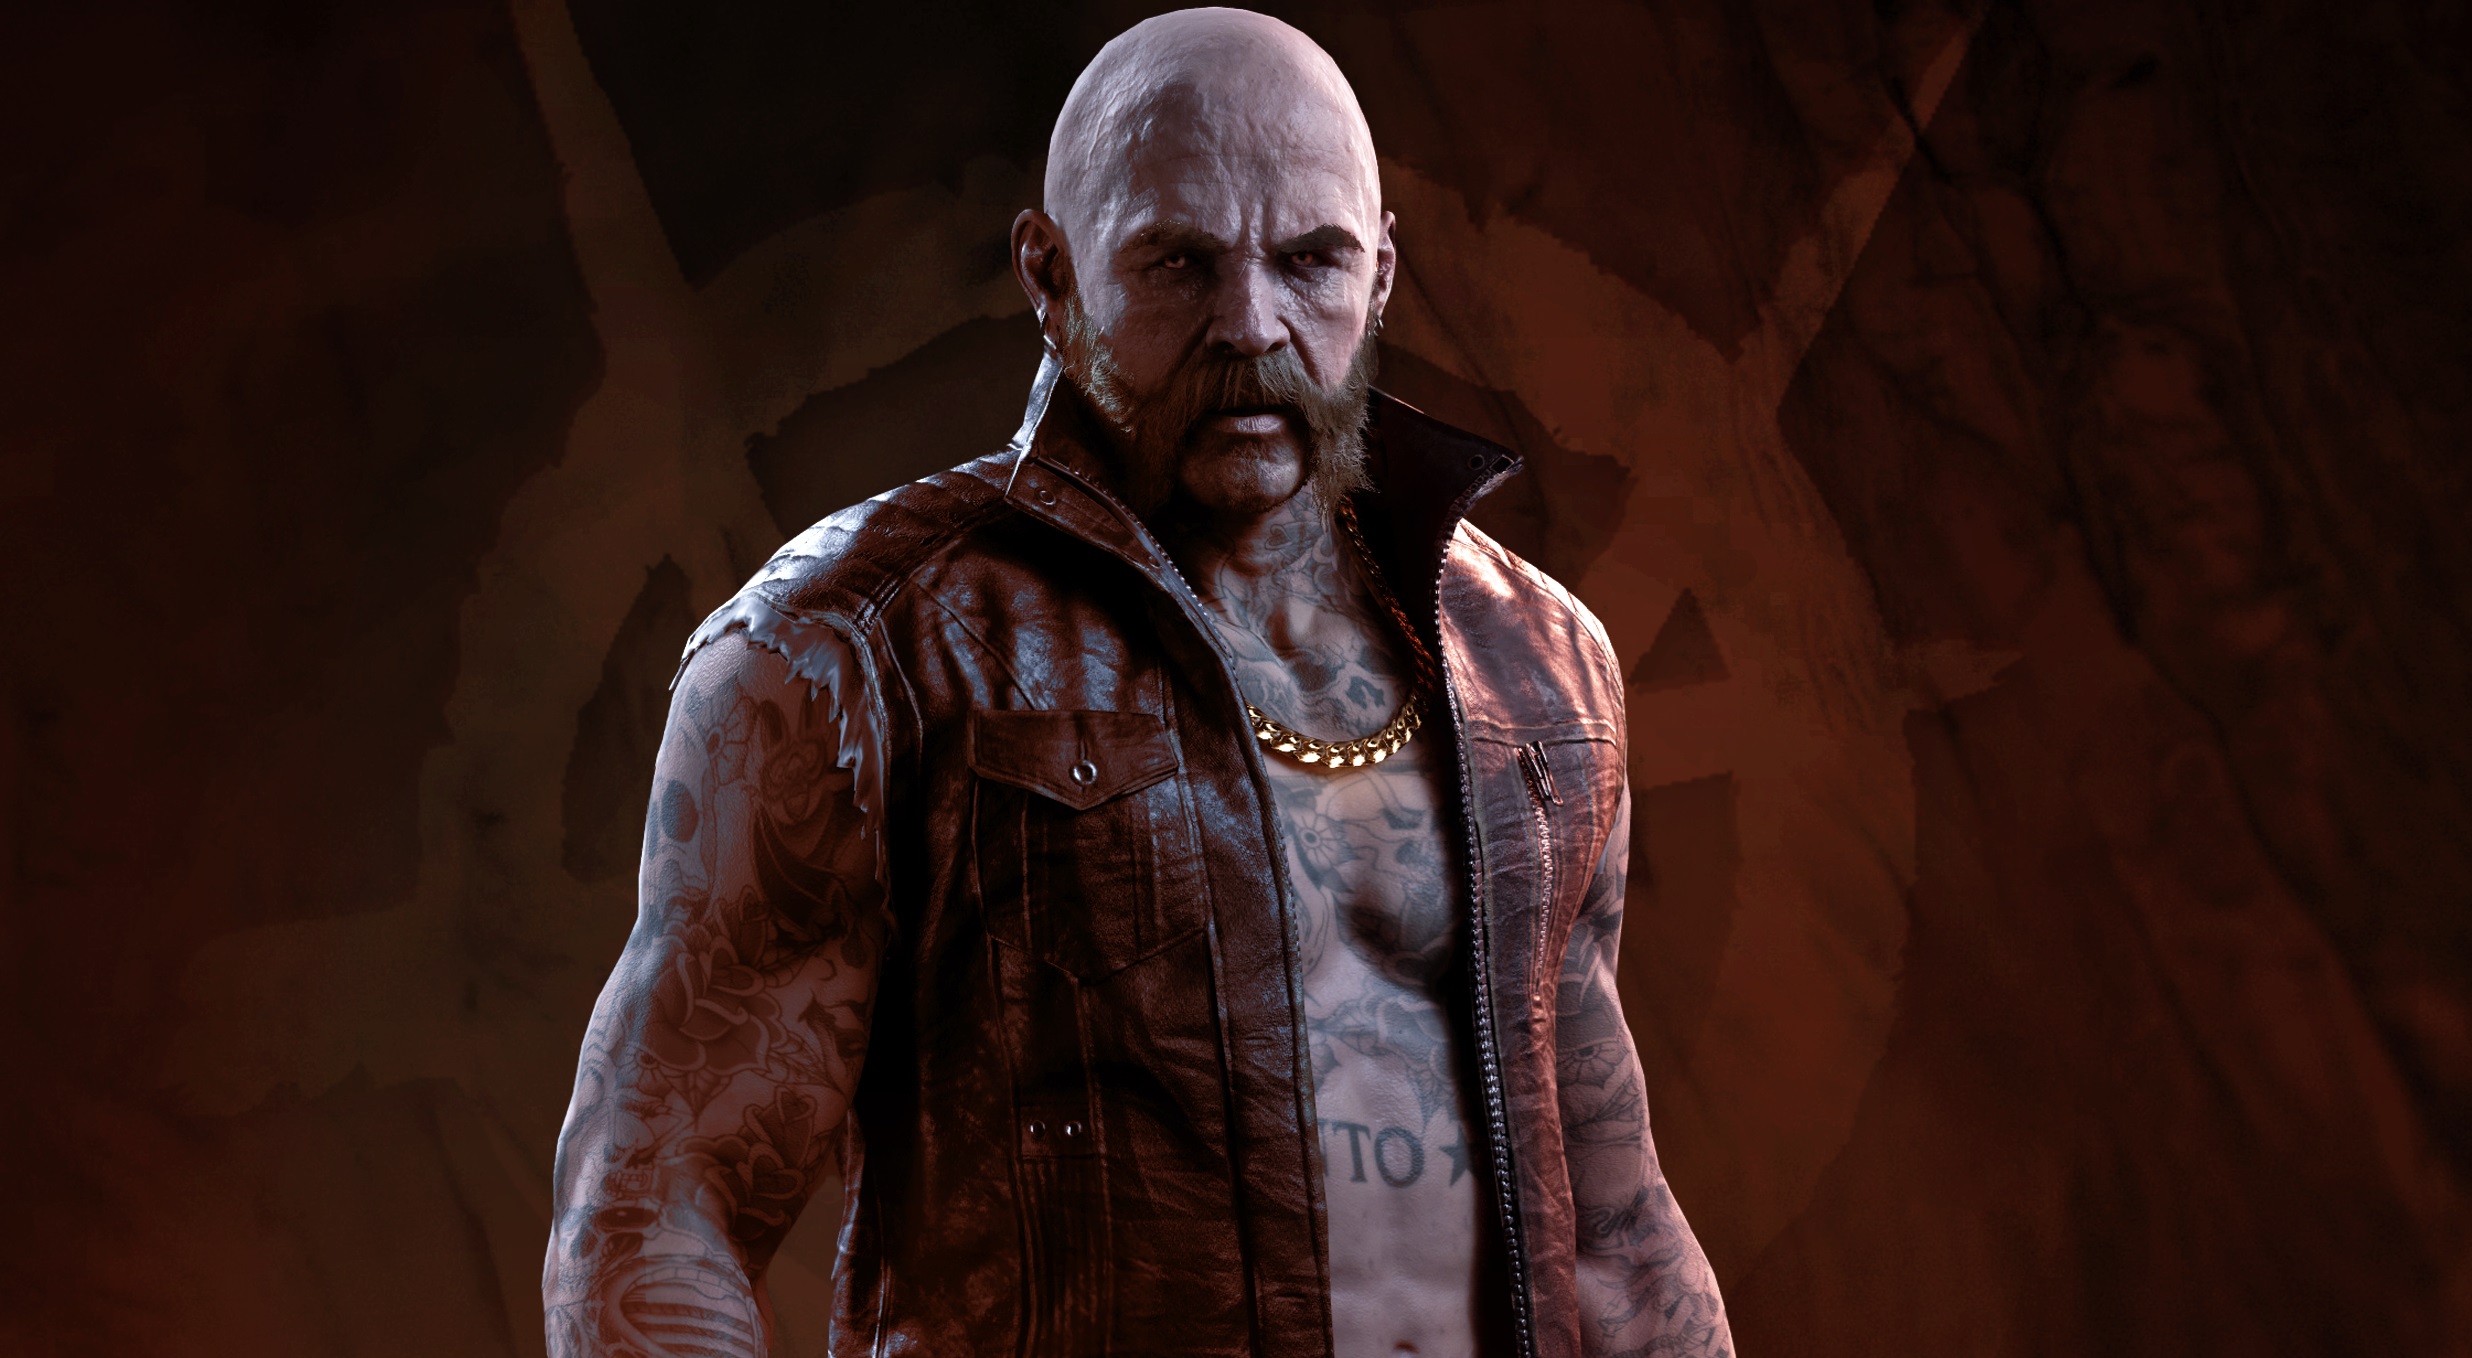  Vampire: The Masquerade – Bloodlines 2's Brujah are big drinkers who flip the bird to taunt enemies 